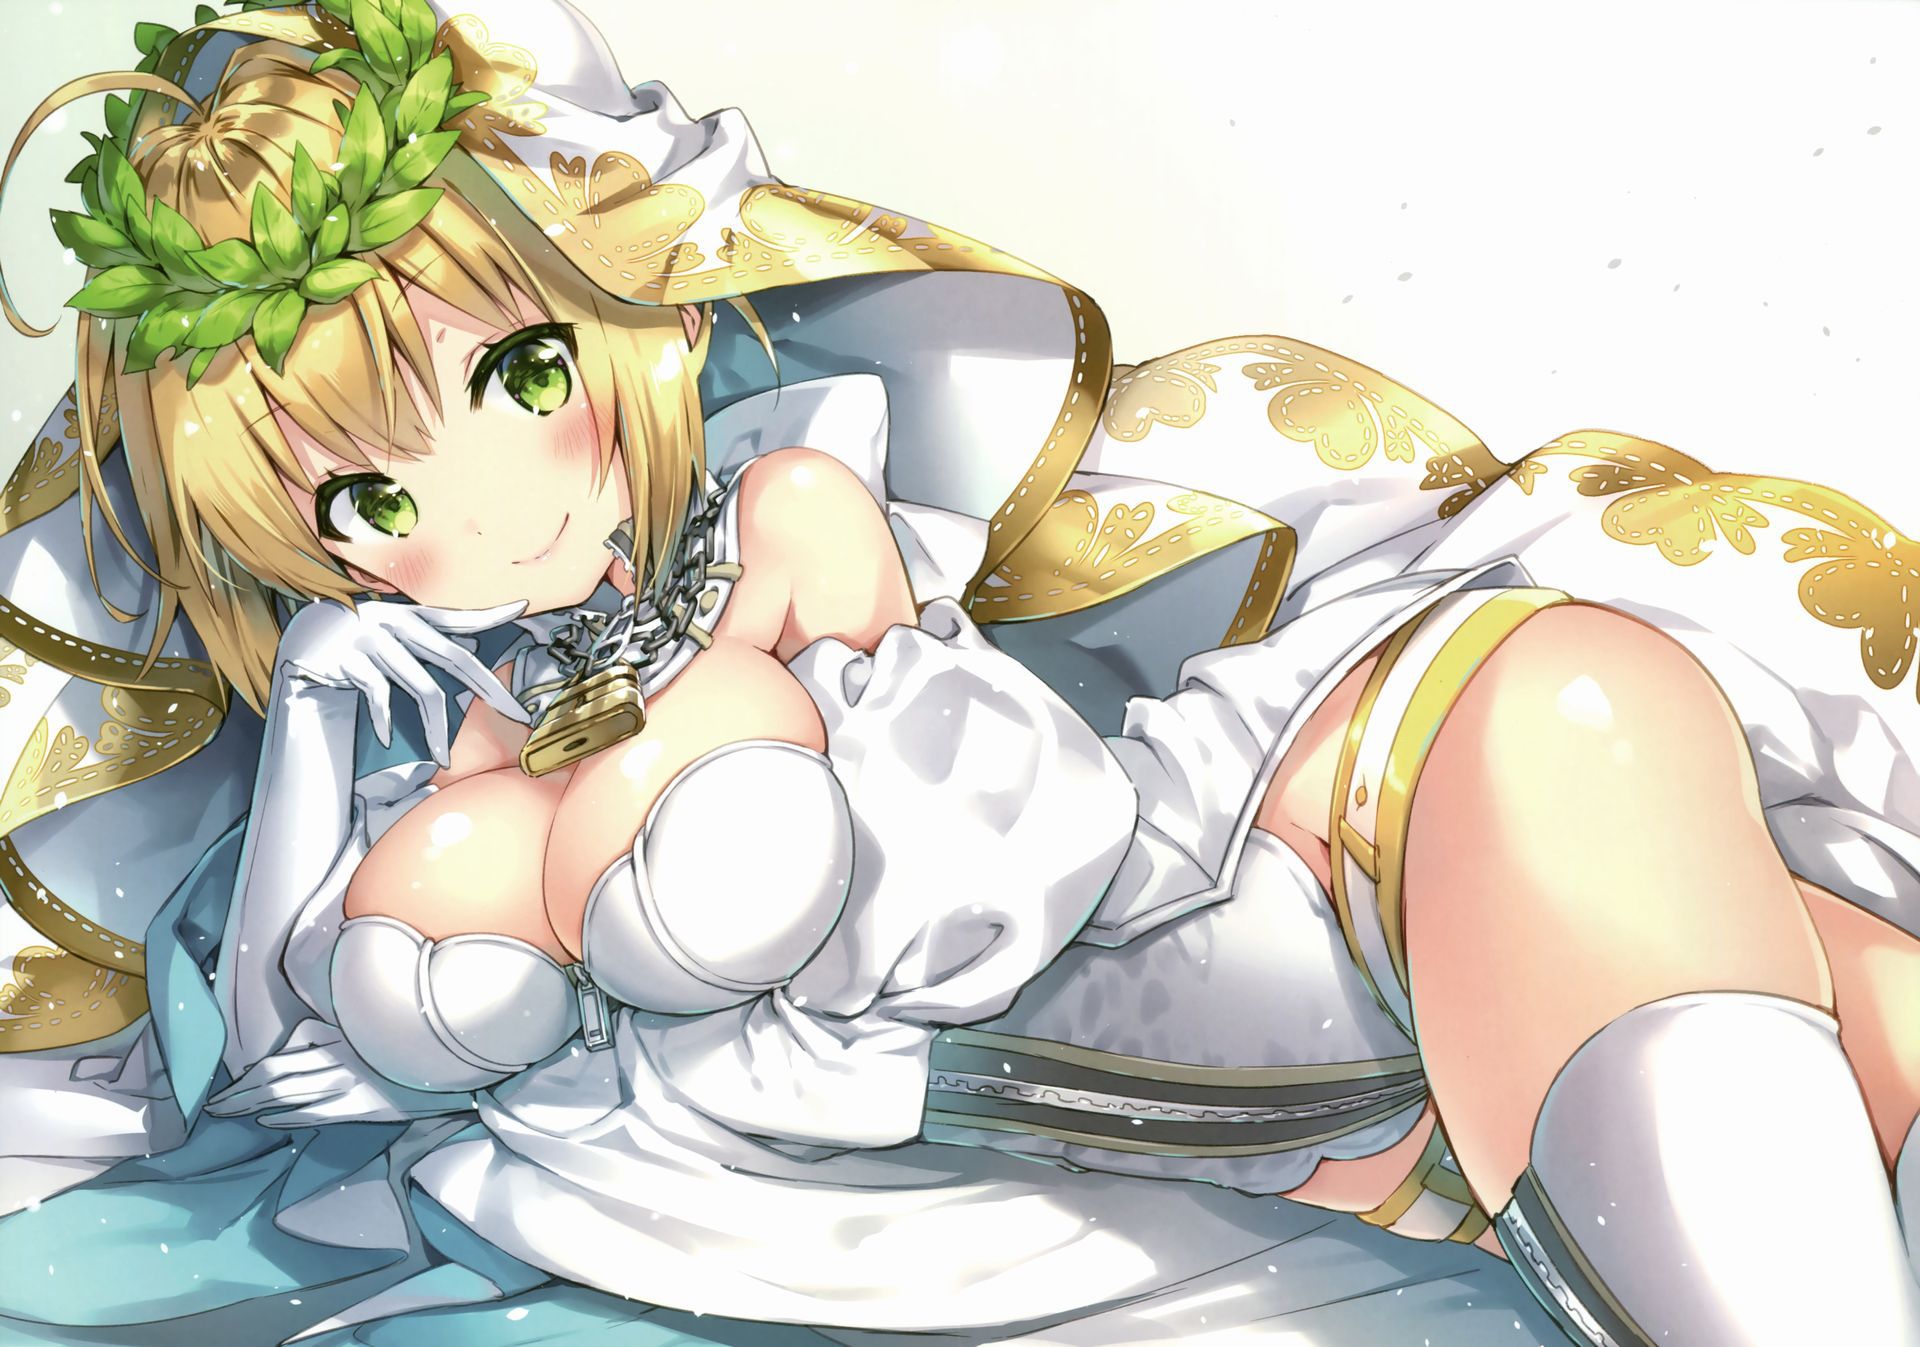 [Secondary ZIP] is about to start anime 100 pieces of cute image summary of Nero Claudius so soon 98